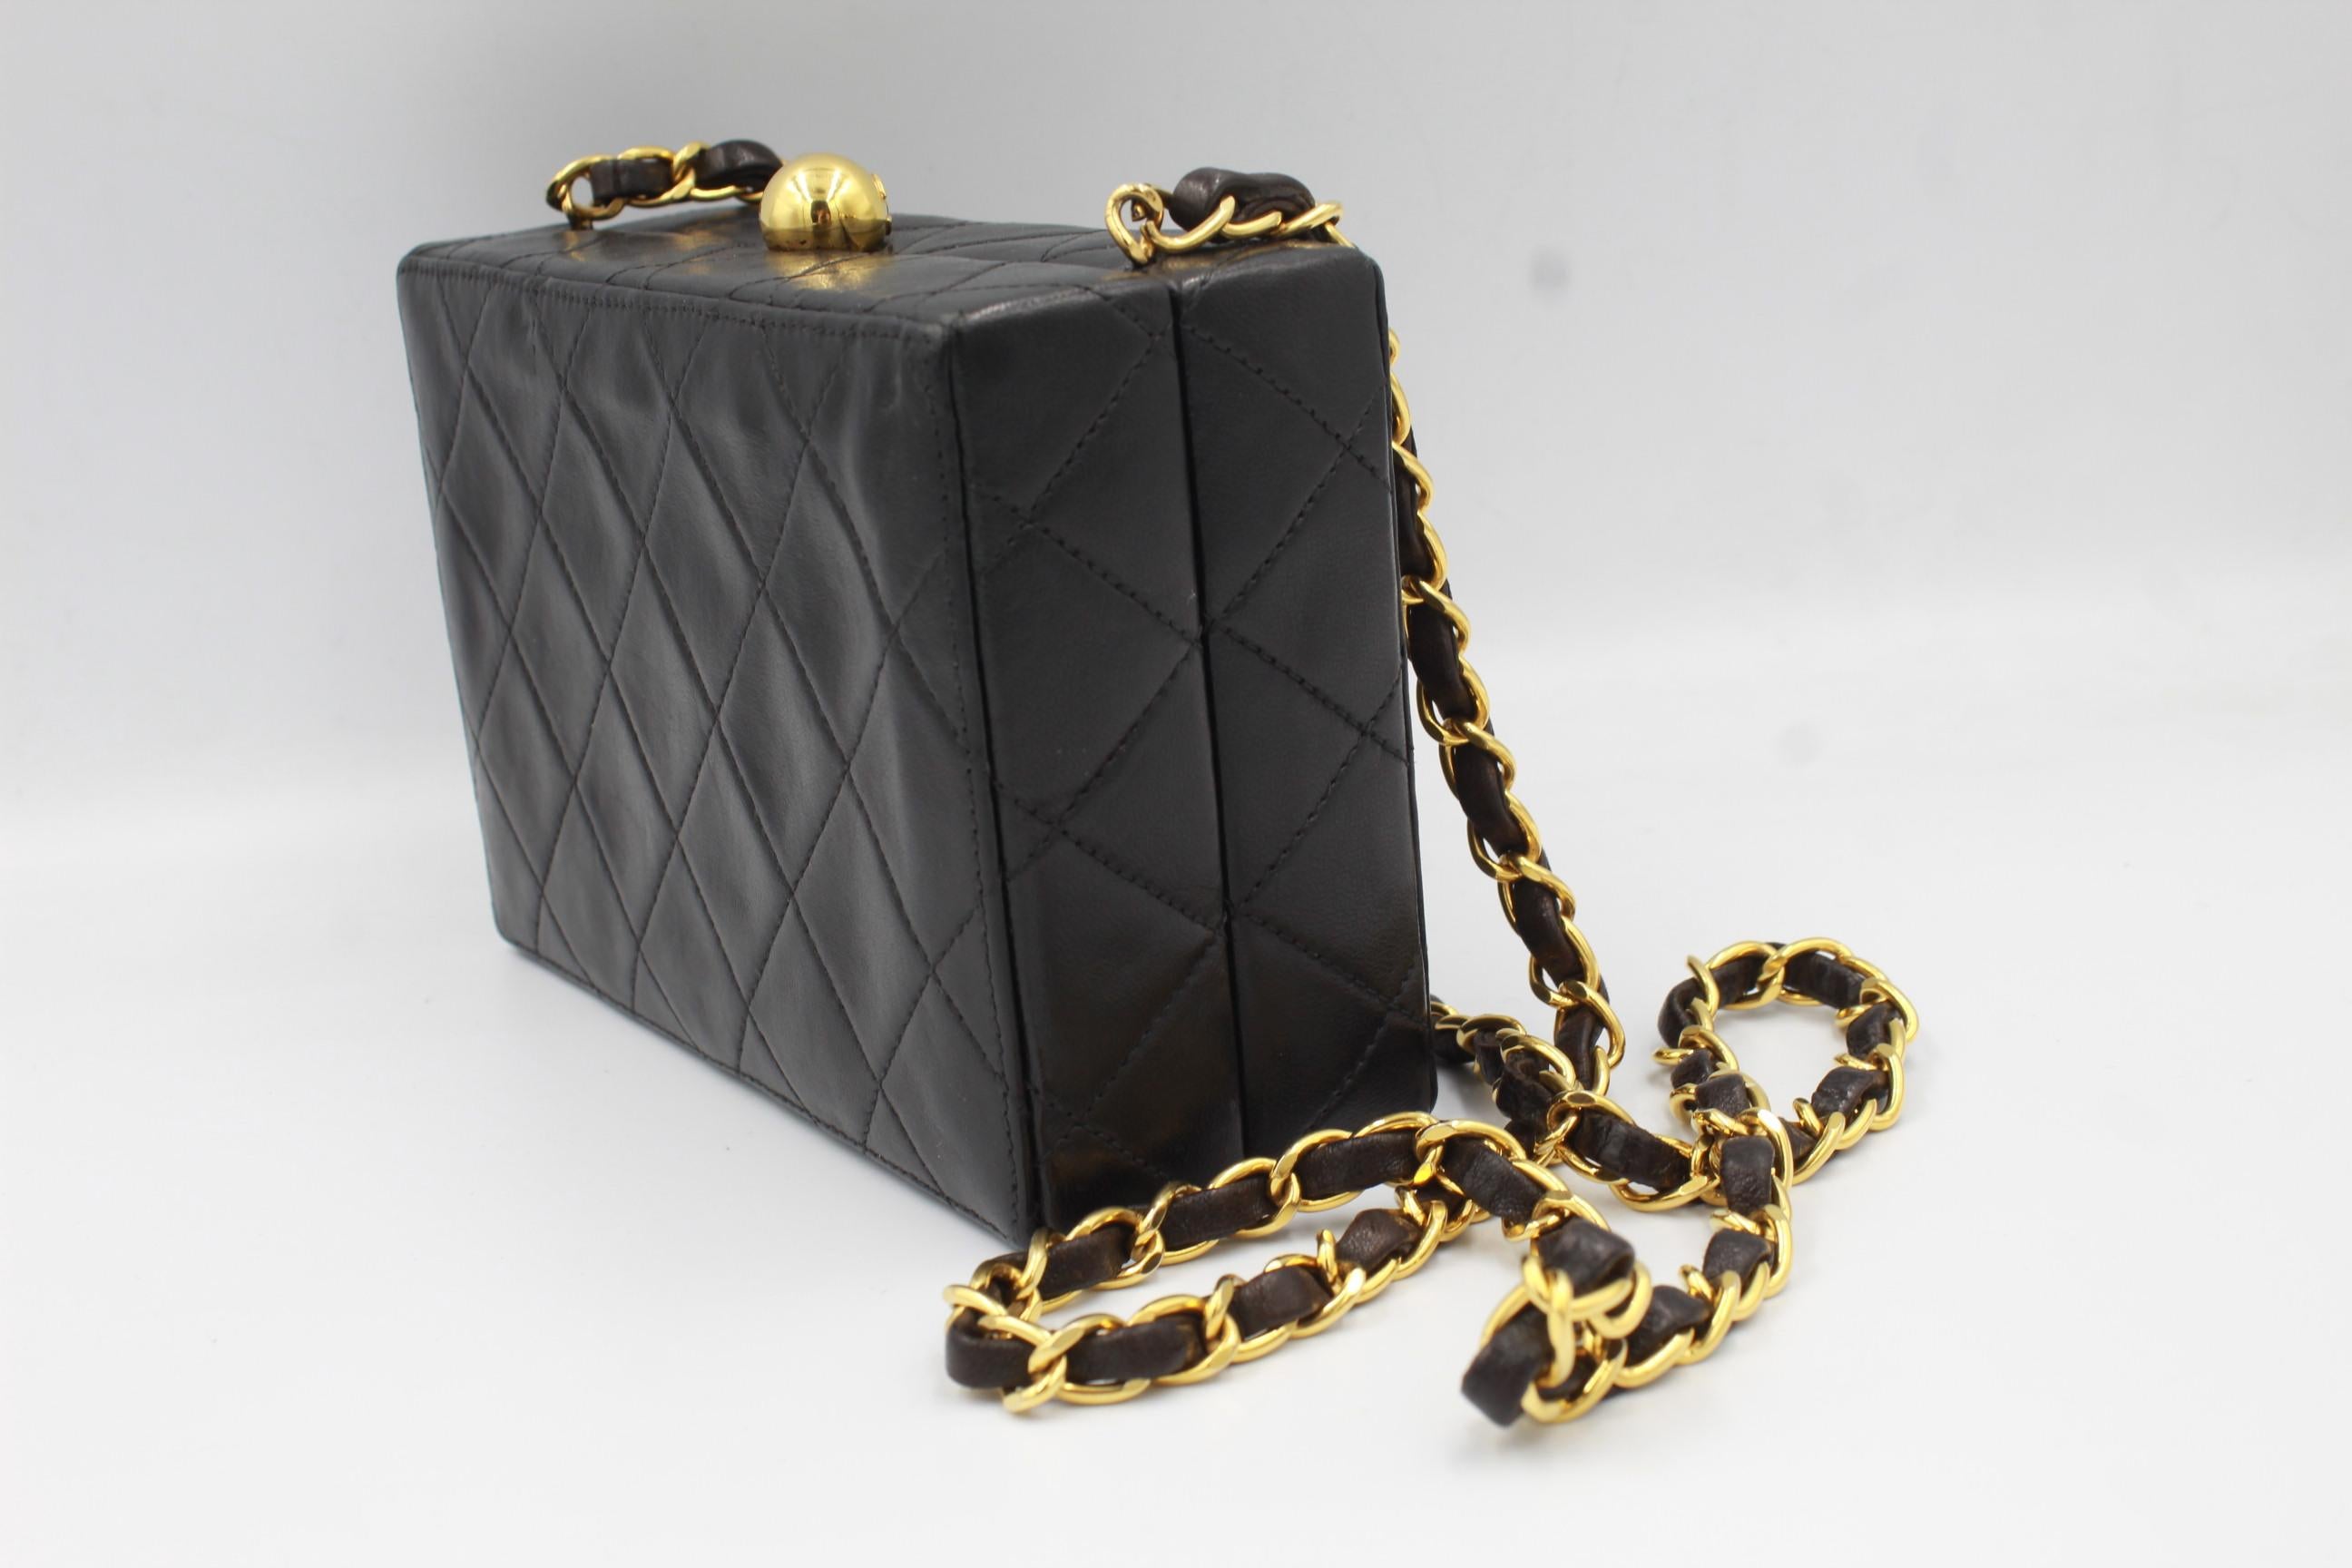 Chanel clutch shoulder bag in black leather.
1996 - 1997
Good condition, with some light signs of wear ( light scratches on the leather ).
Can be wear crossbody. 
11cm x 17cm x 6cm